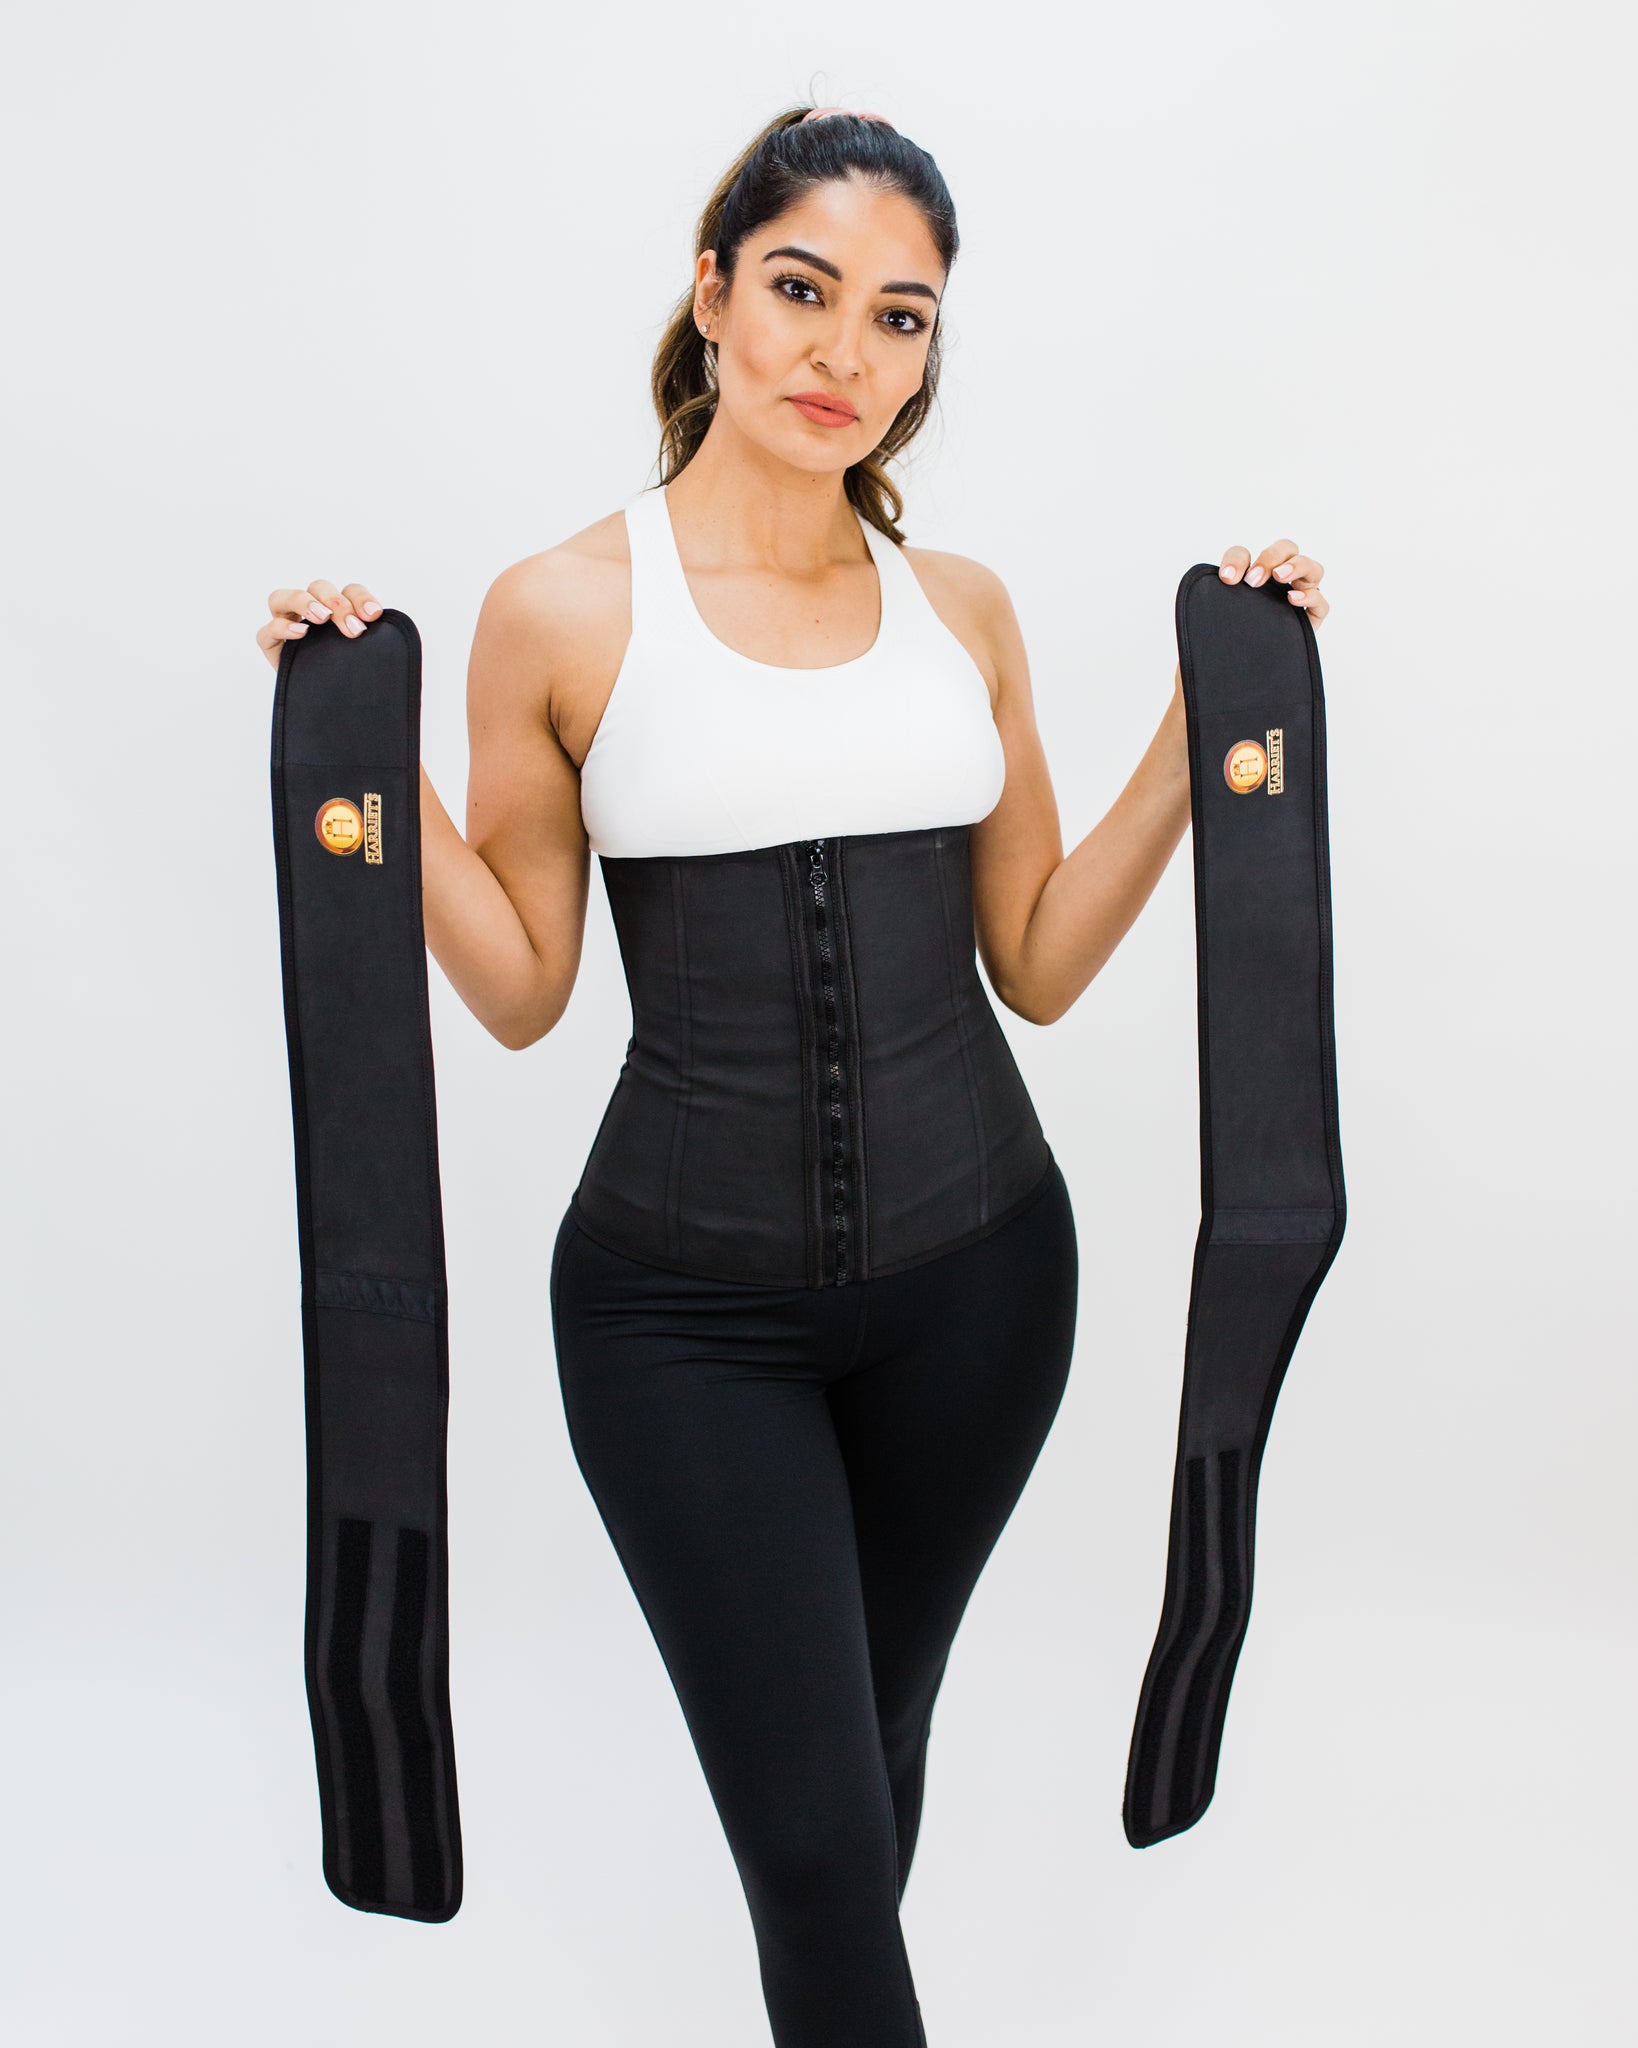 Double Compression Waist Trainer, Competition Kit